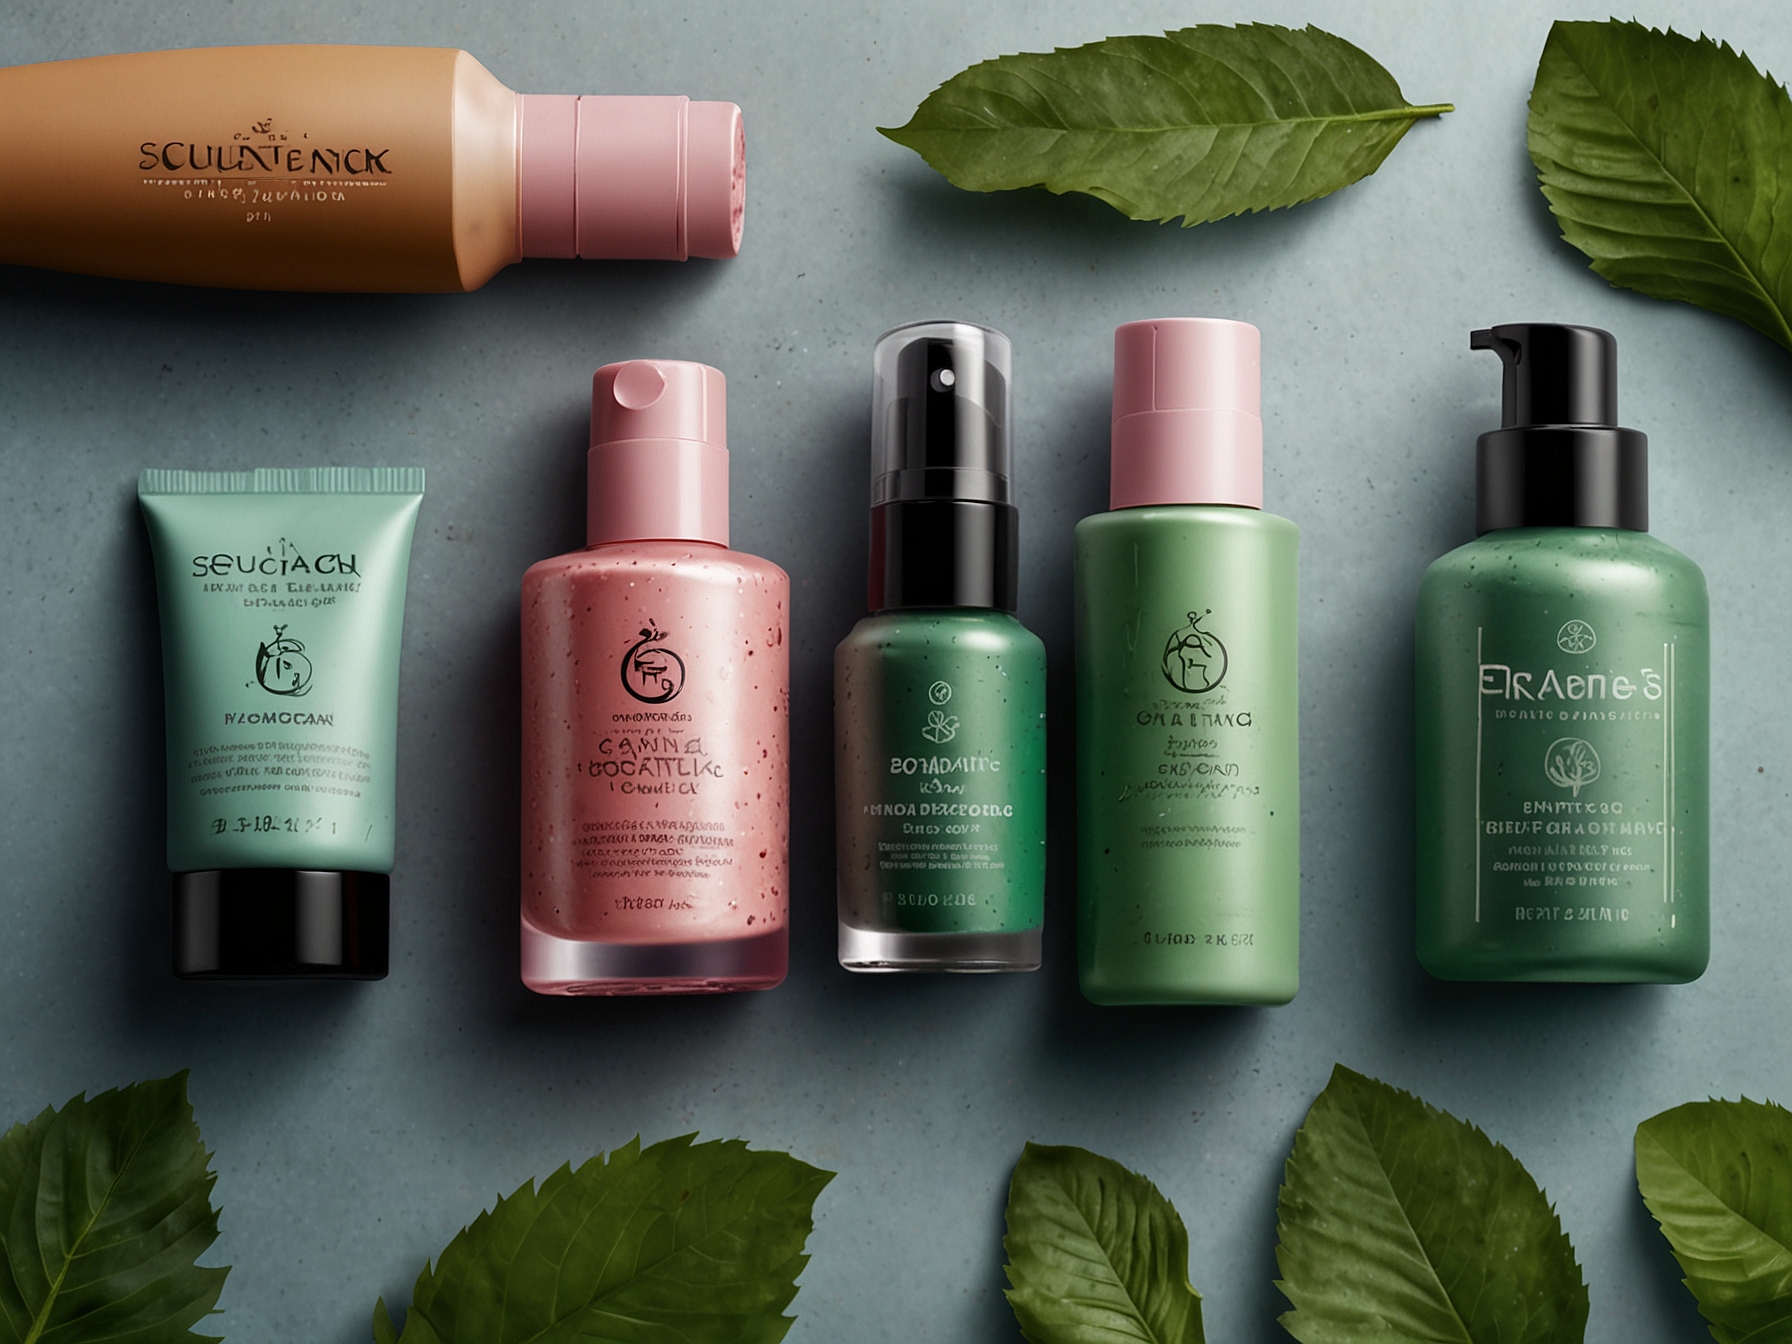 A visual representation of eco-friendly beauty products developed through the Big Bang Innovation Program, highlighting sustainable packaging and environmentally friendly formulations tailored for North Asian consumers.